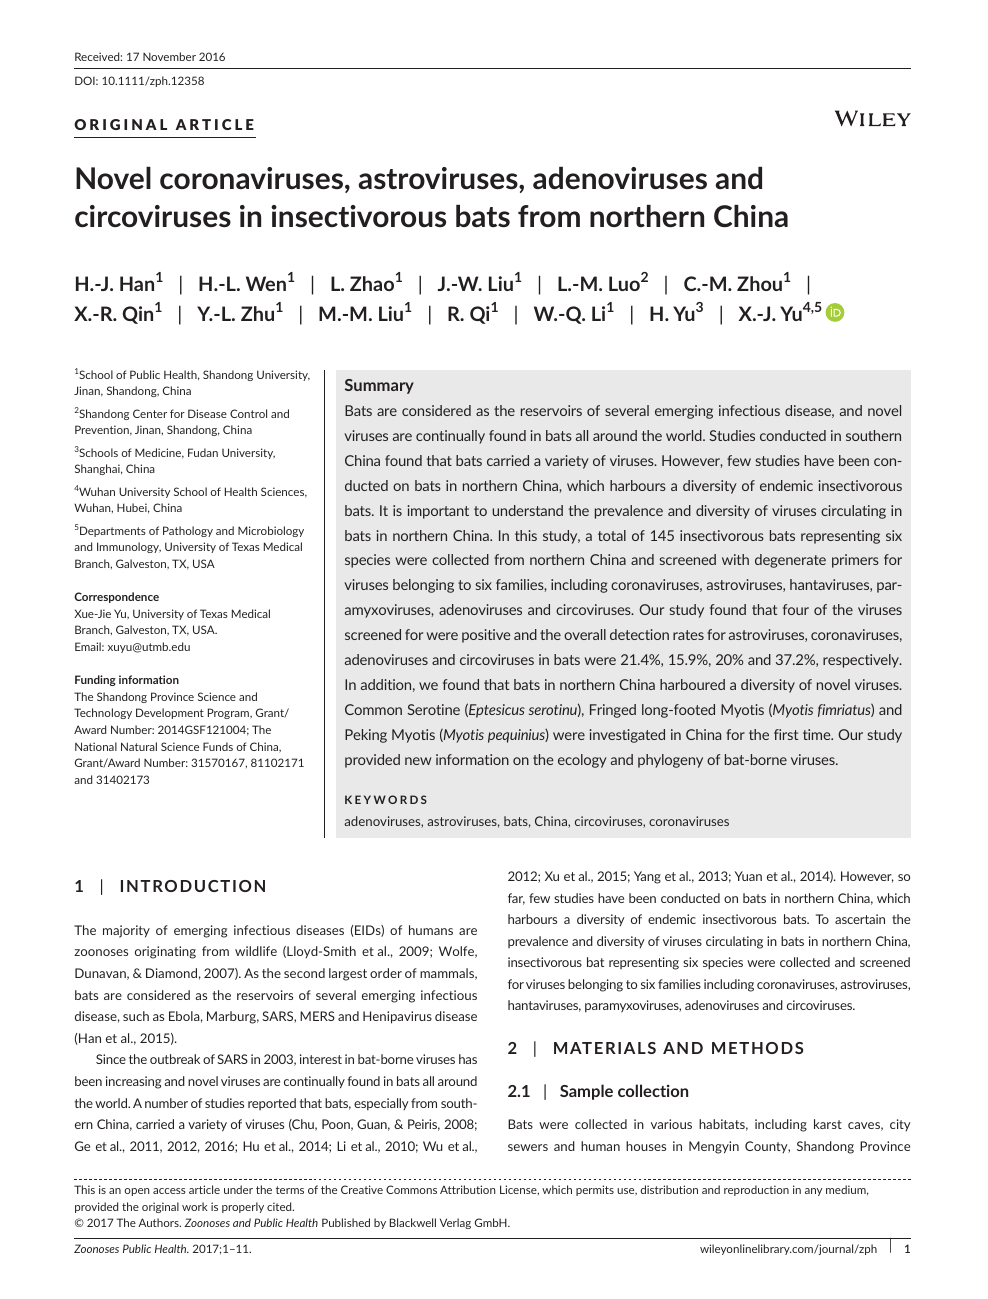 Novel Coronaviruses Astroviruses Adenoviruses And Circoviruses In Insectivorous Bats From Northern China Topic Of Research Paper In Biological Sciences Download Scholarly Article Pdf And Read For Free On Cyberleninka Open Science